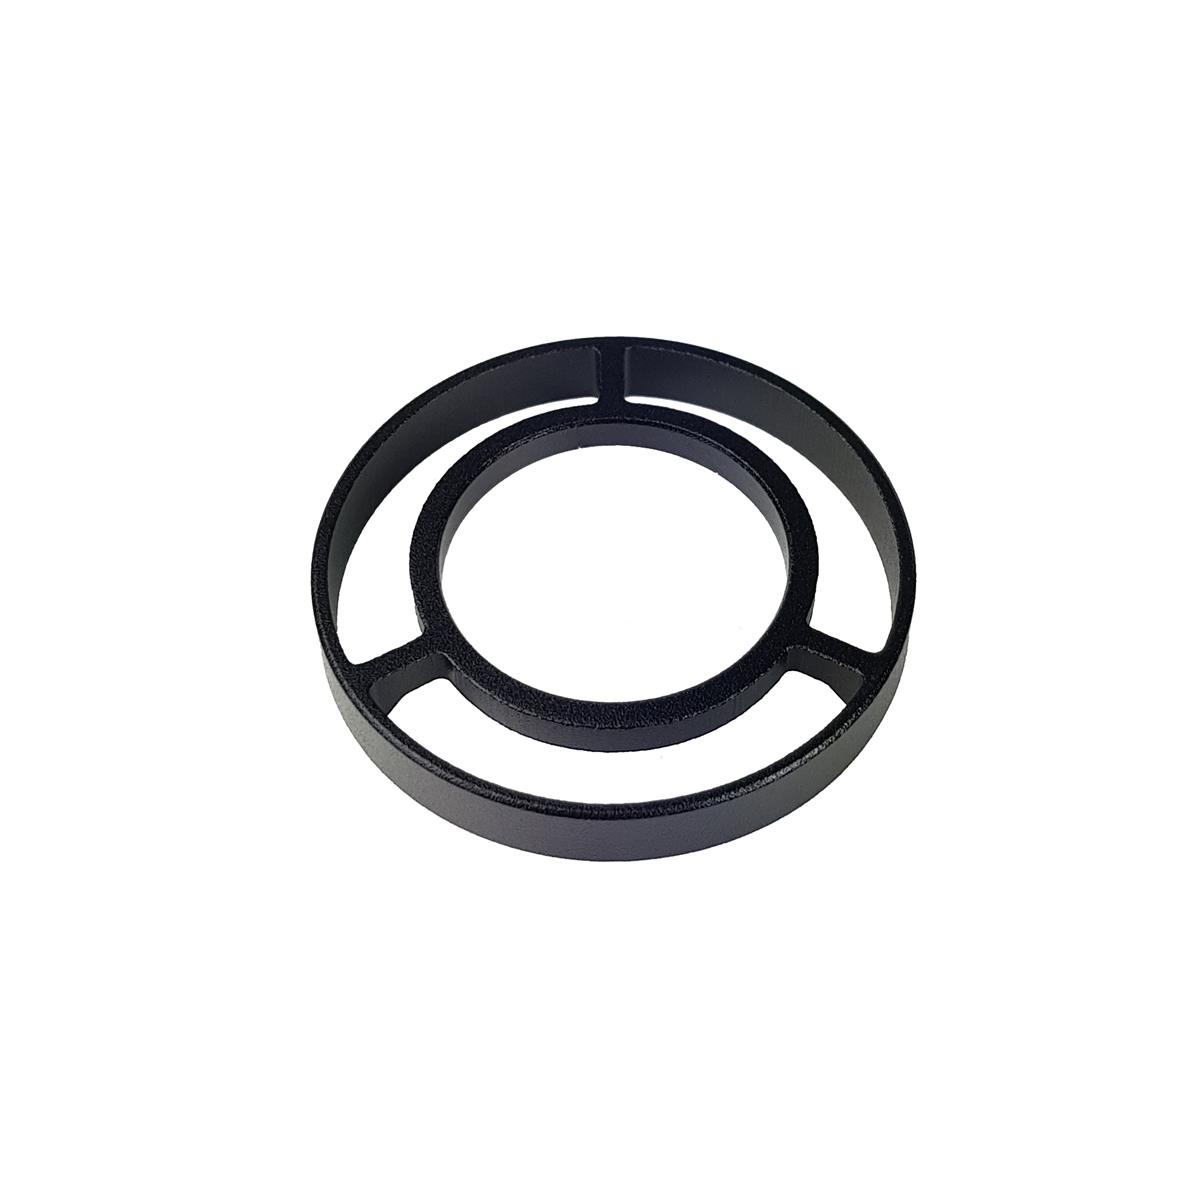 Oversize spacer tapered 1-1/8'' 5mm for Acros headset